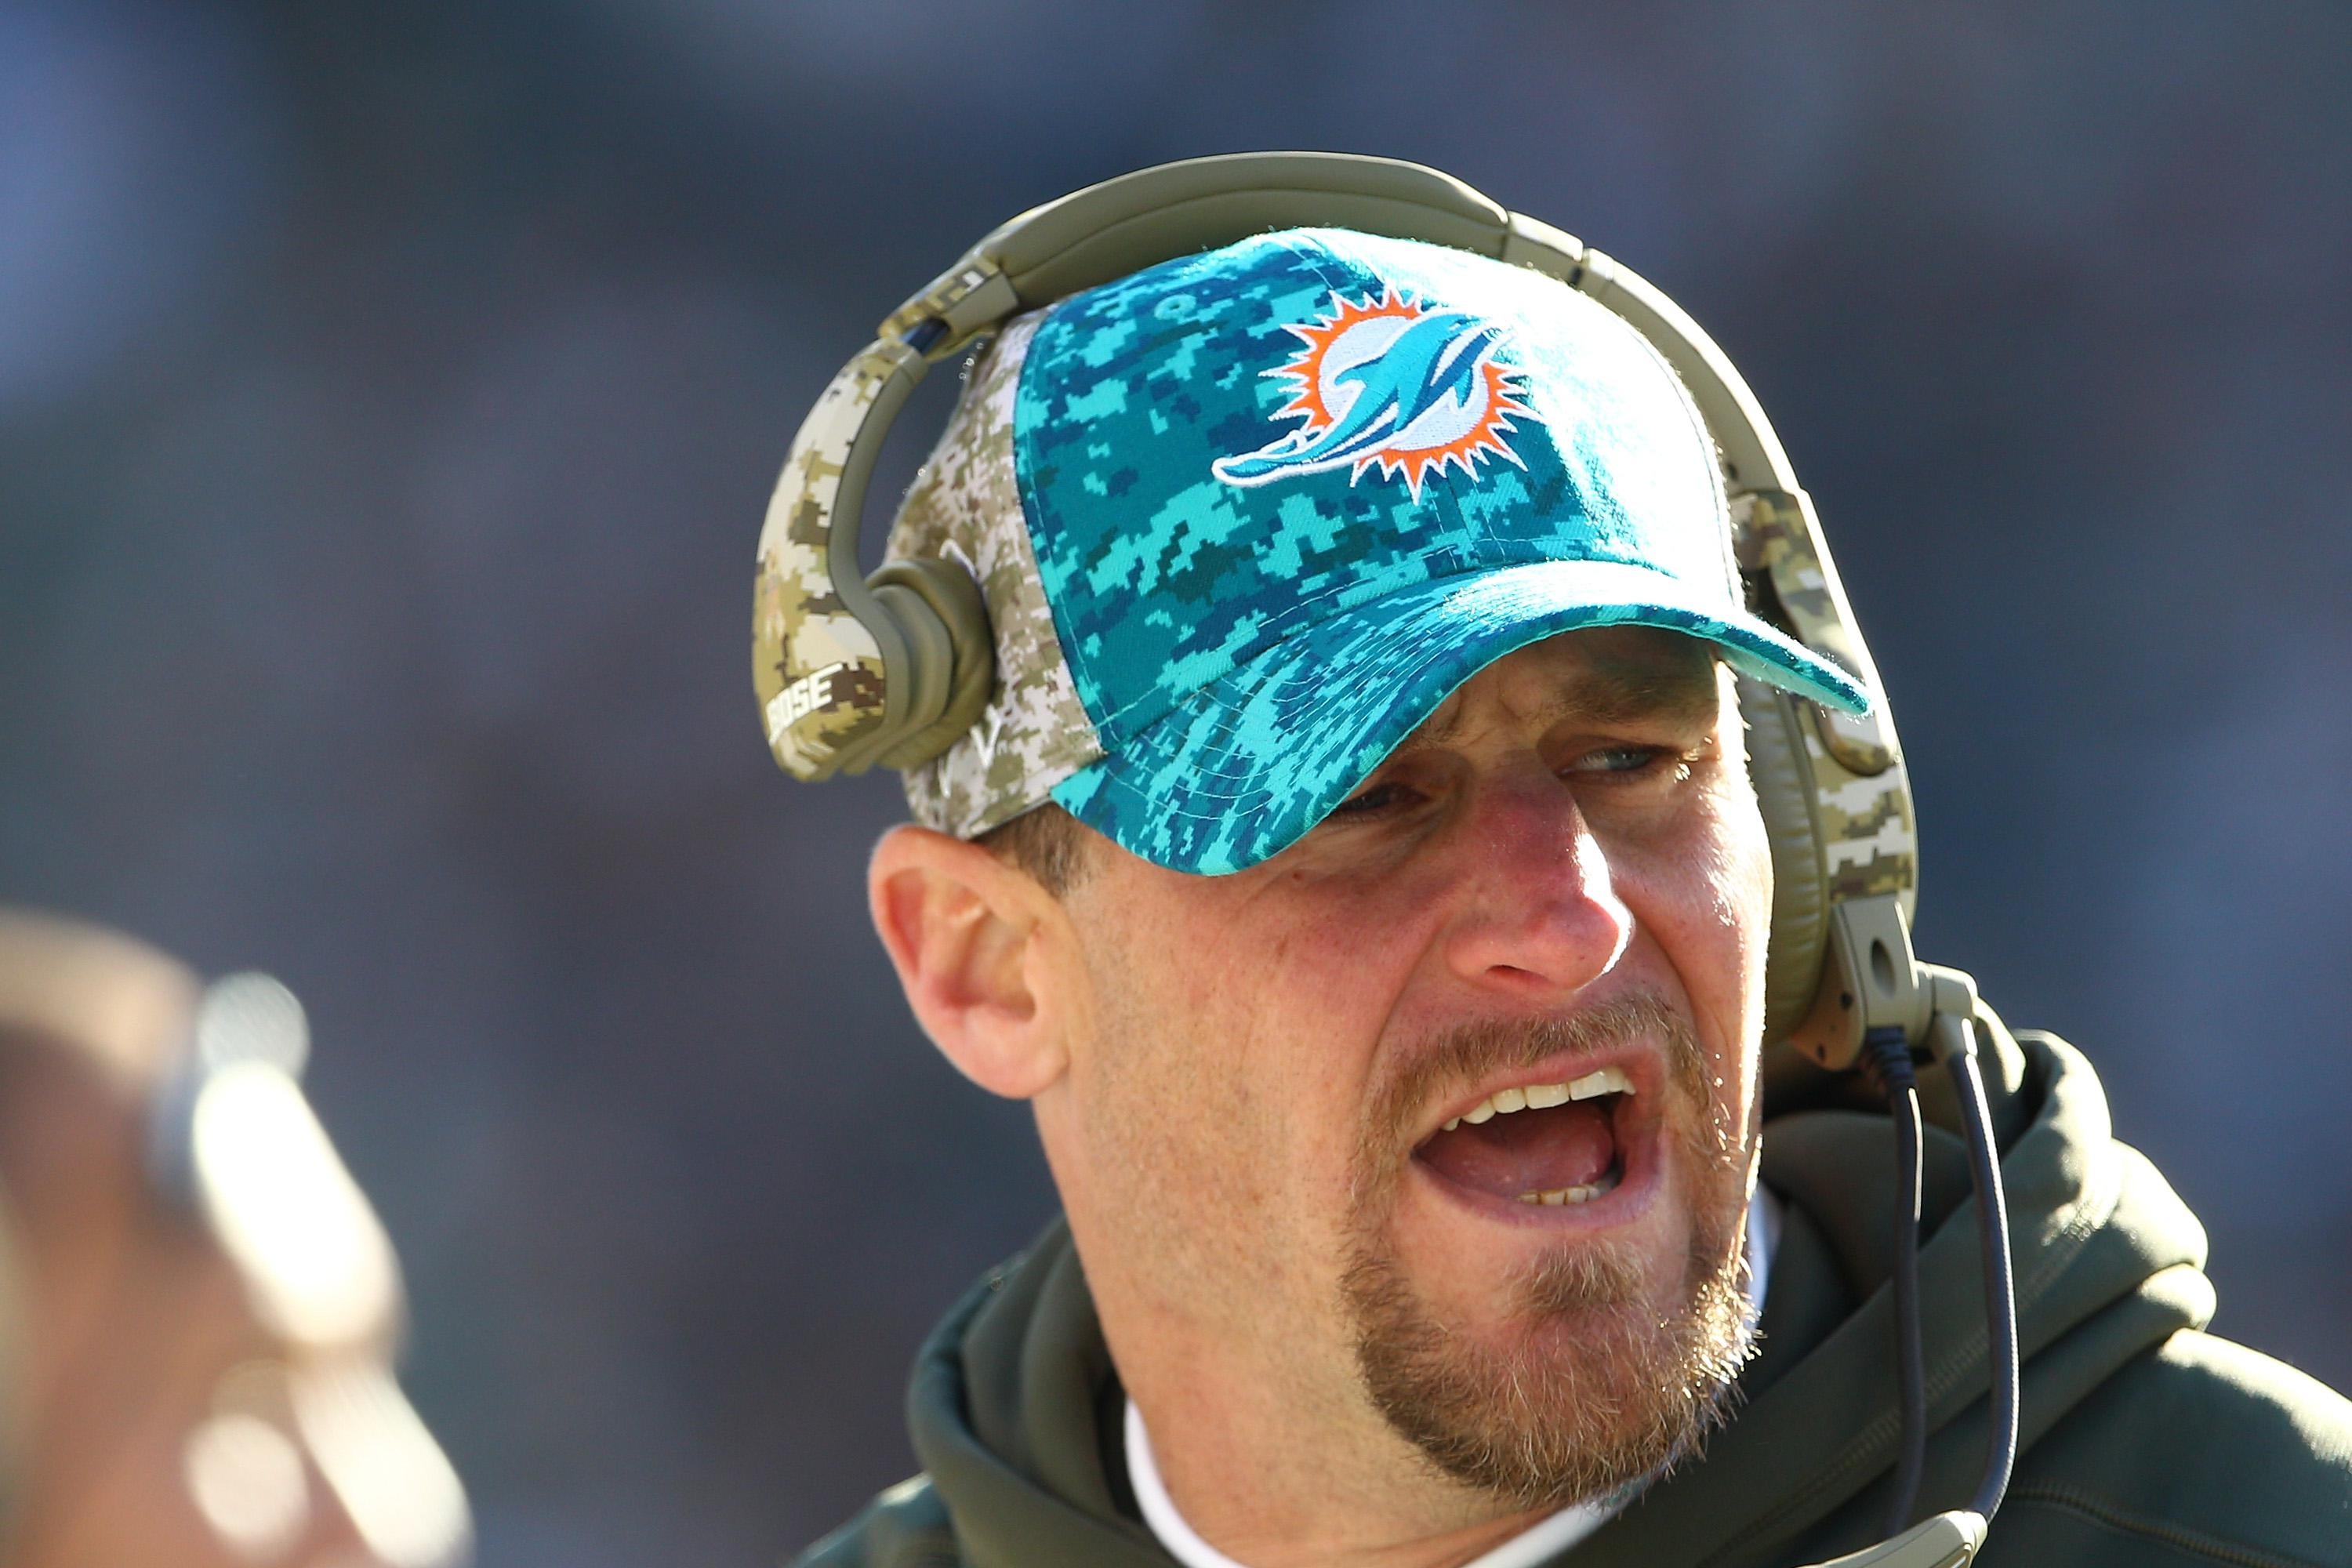 Campbell looks on during a Dolphins game, with his mouth open